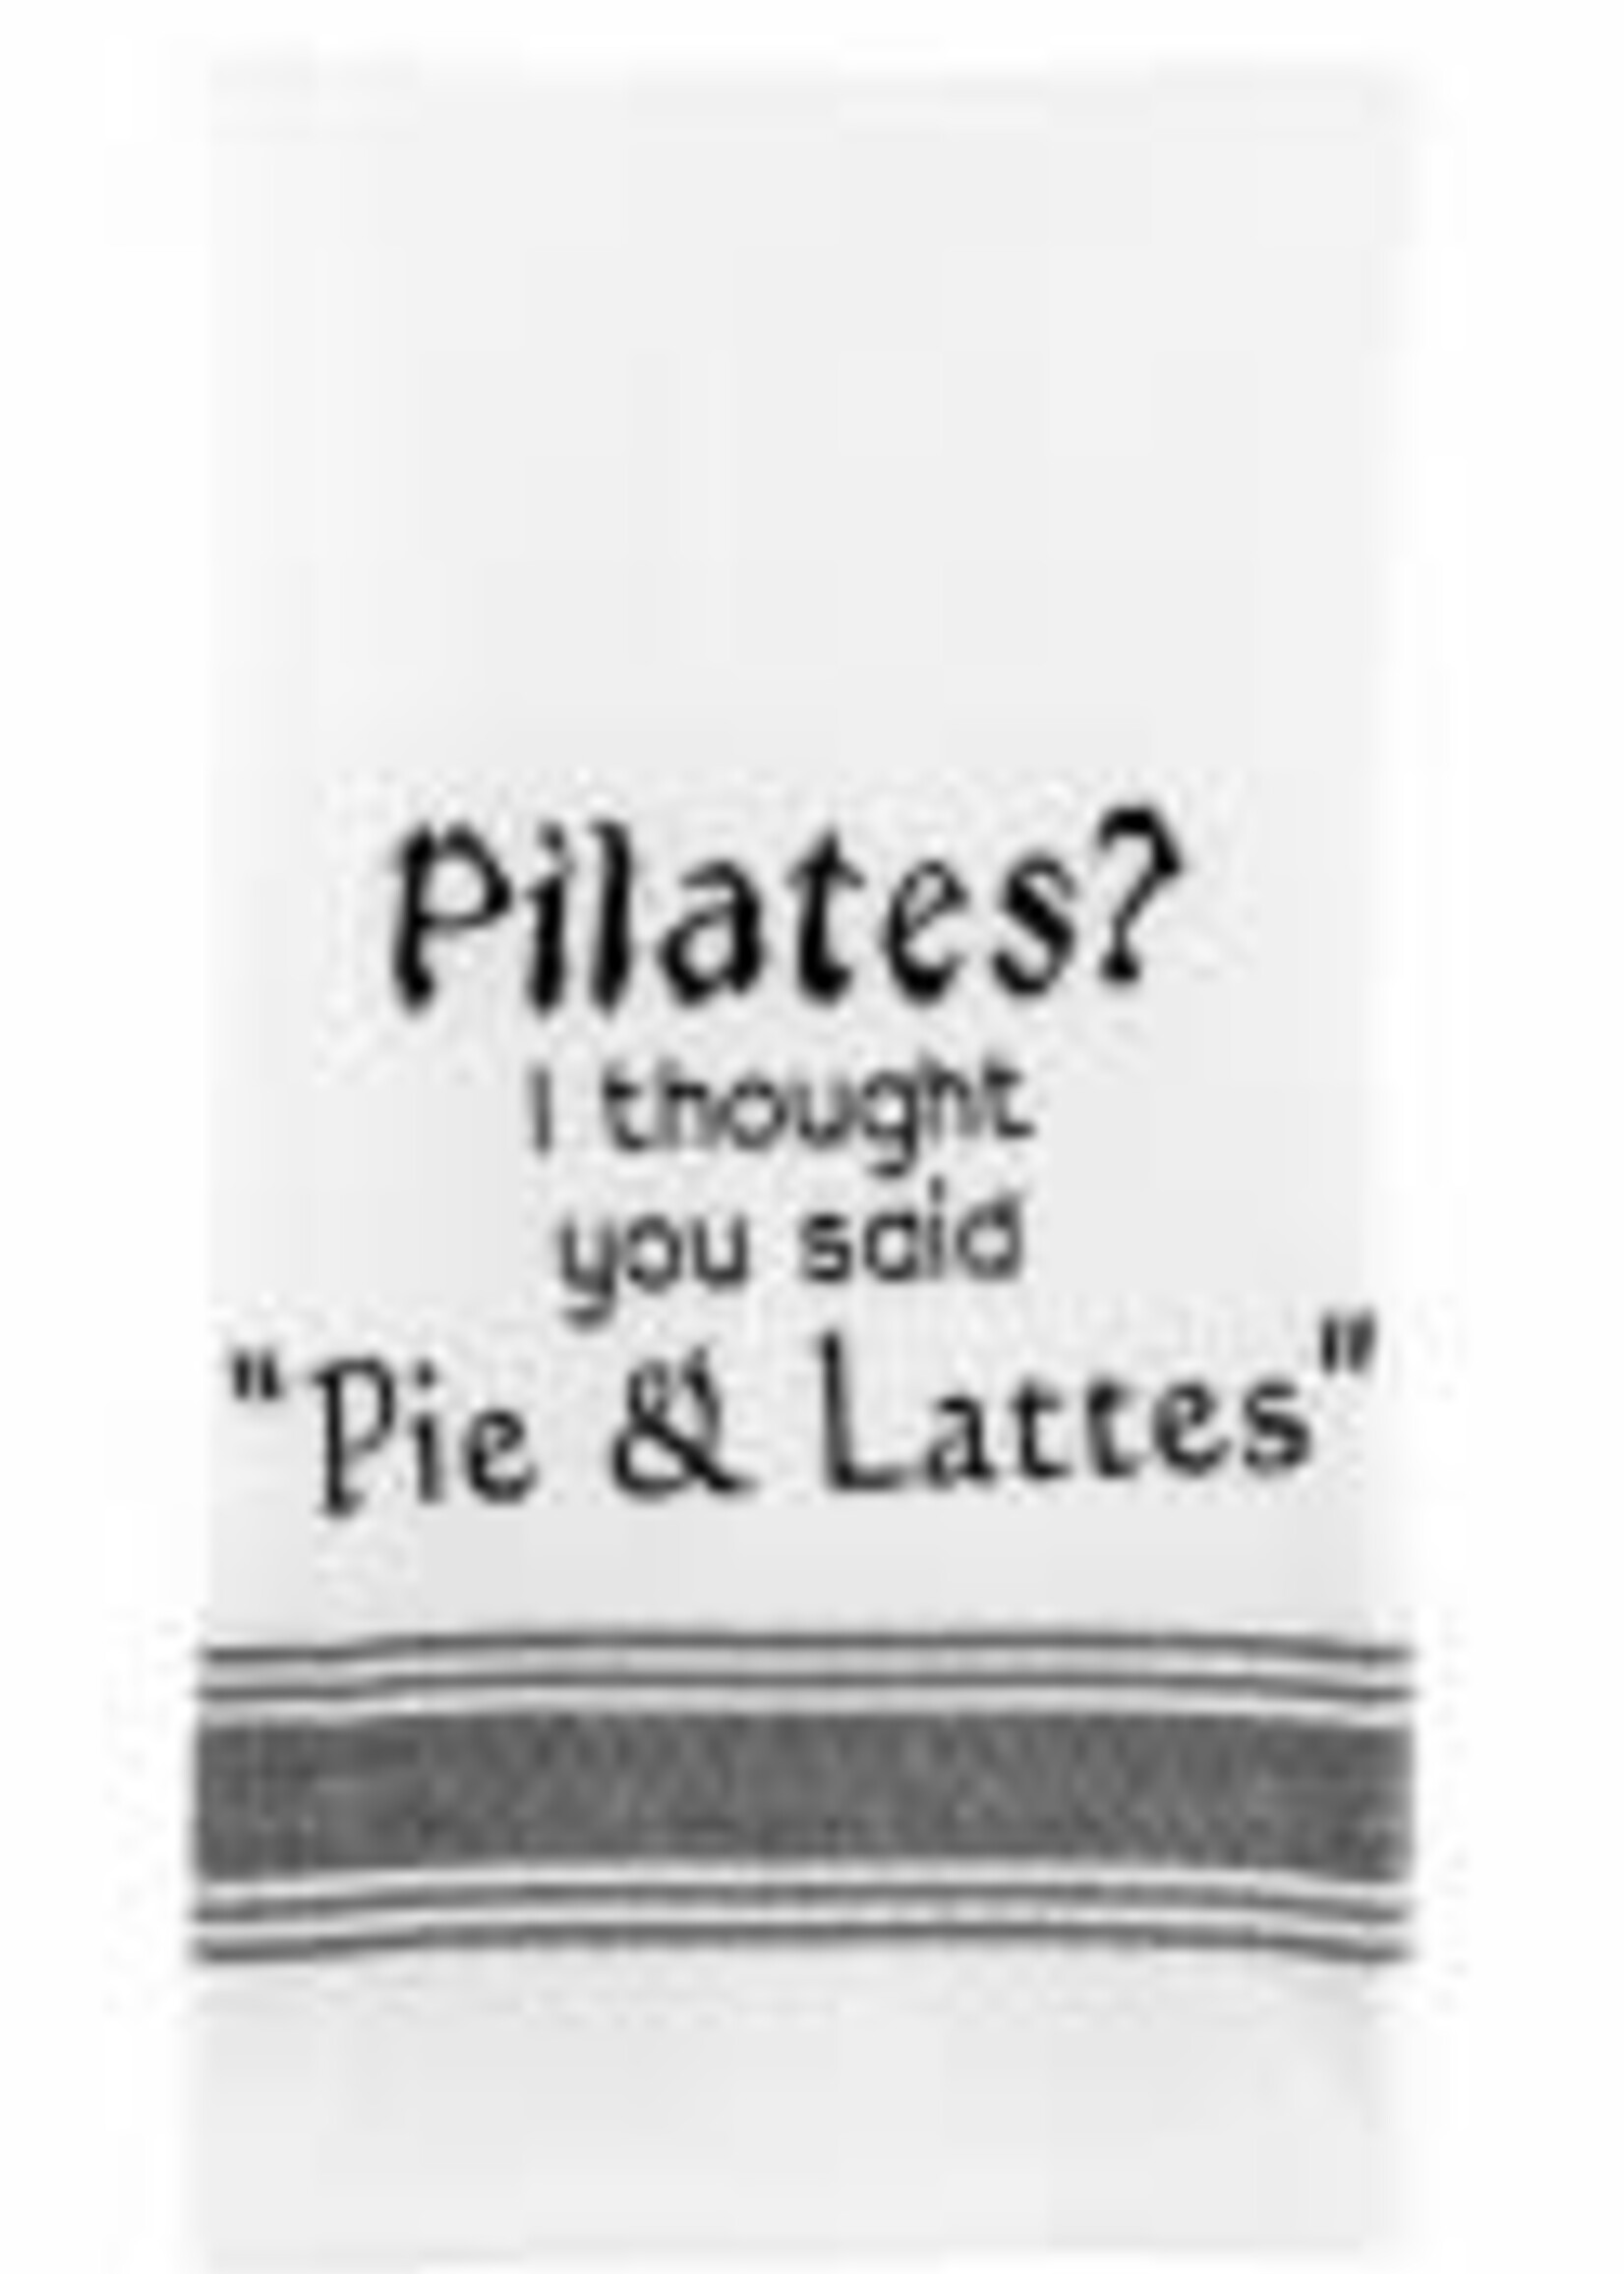 Wild Hare Designs Bistro Towel: Pilates?  I thought you said 'pie and lattes'